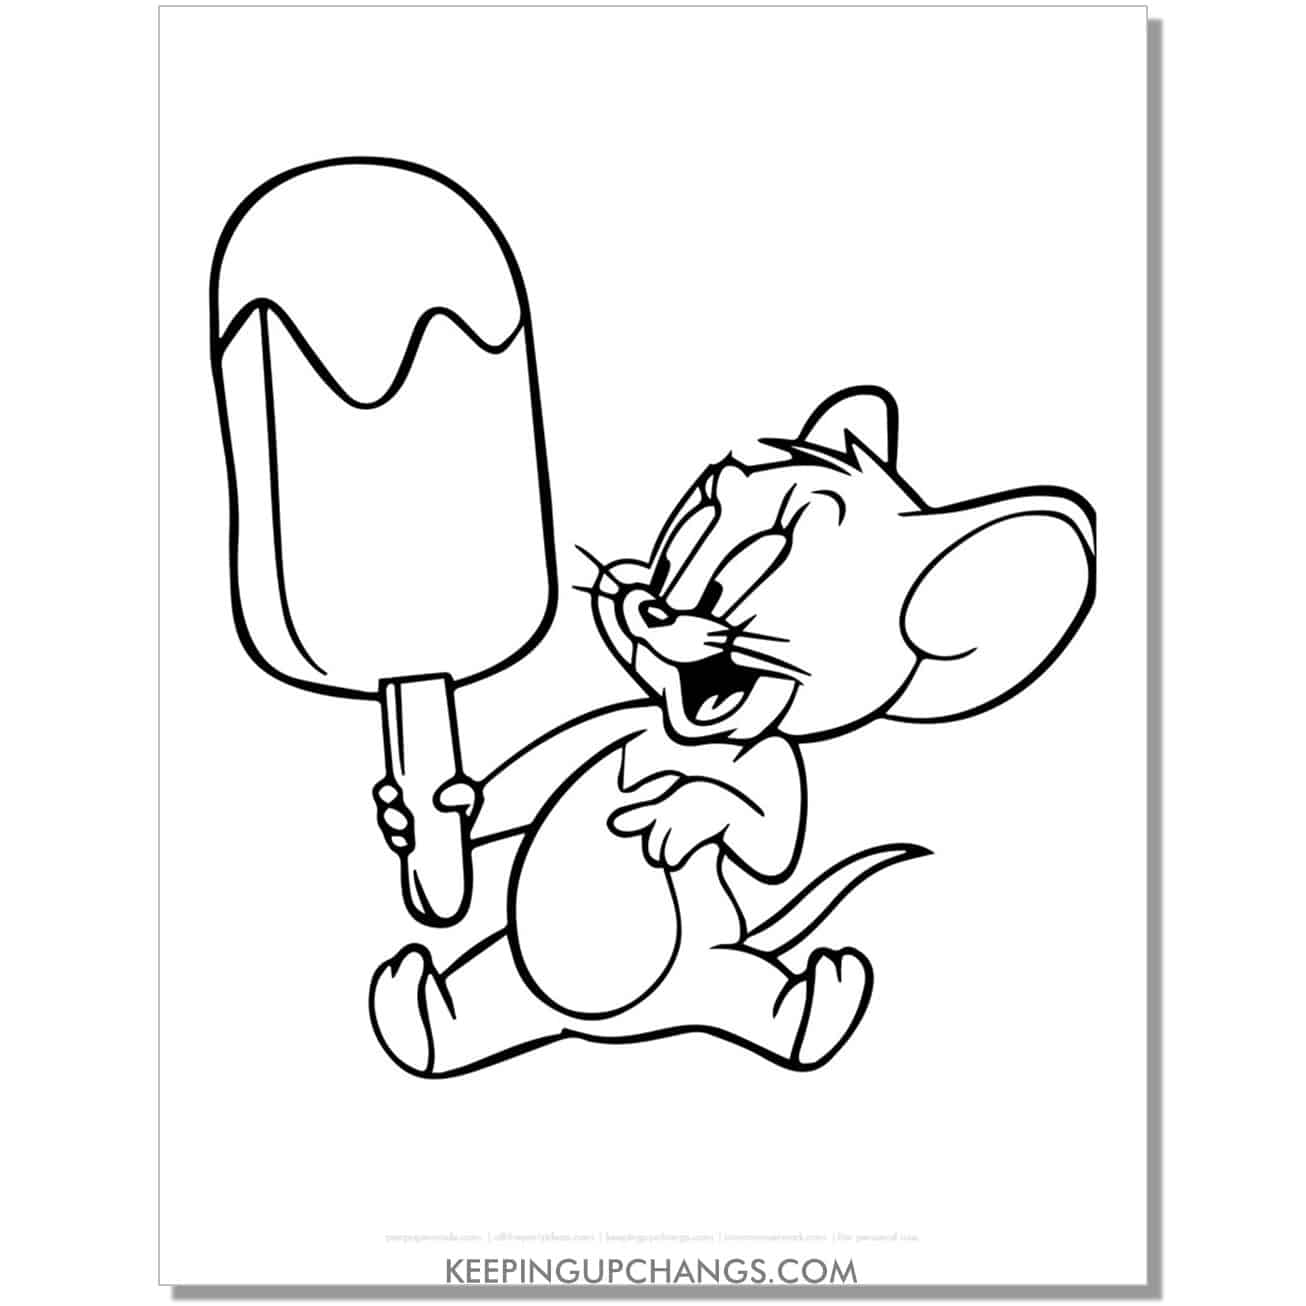 free jerry with ice cream popsicle coloring page.